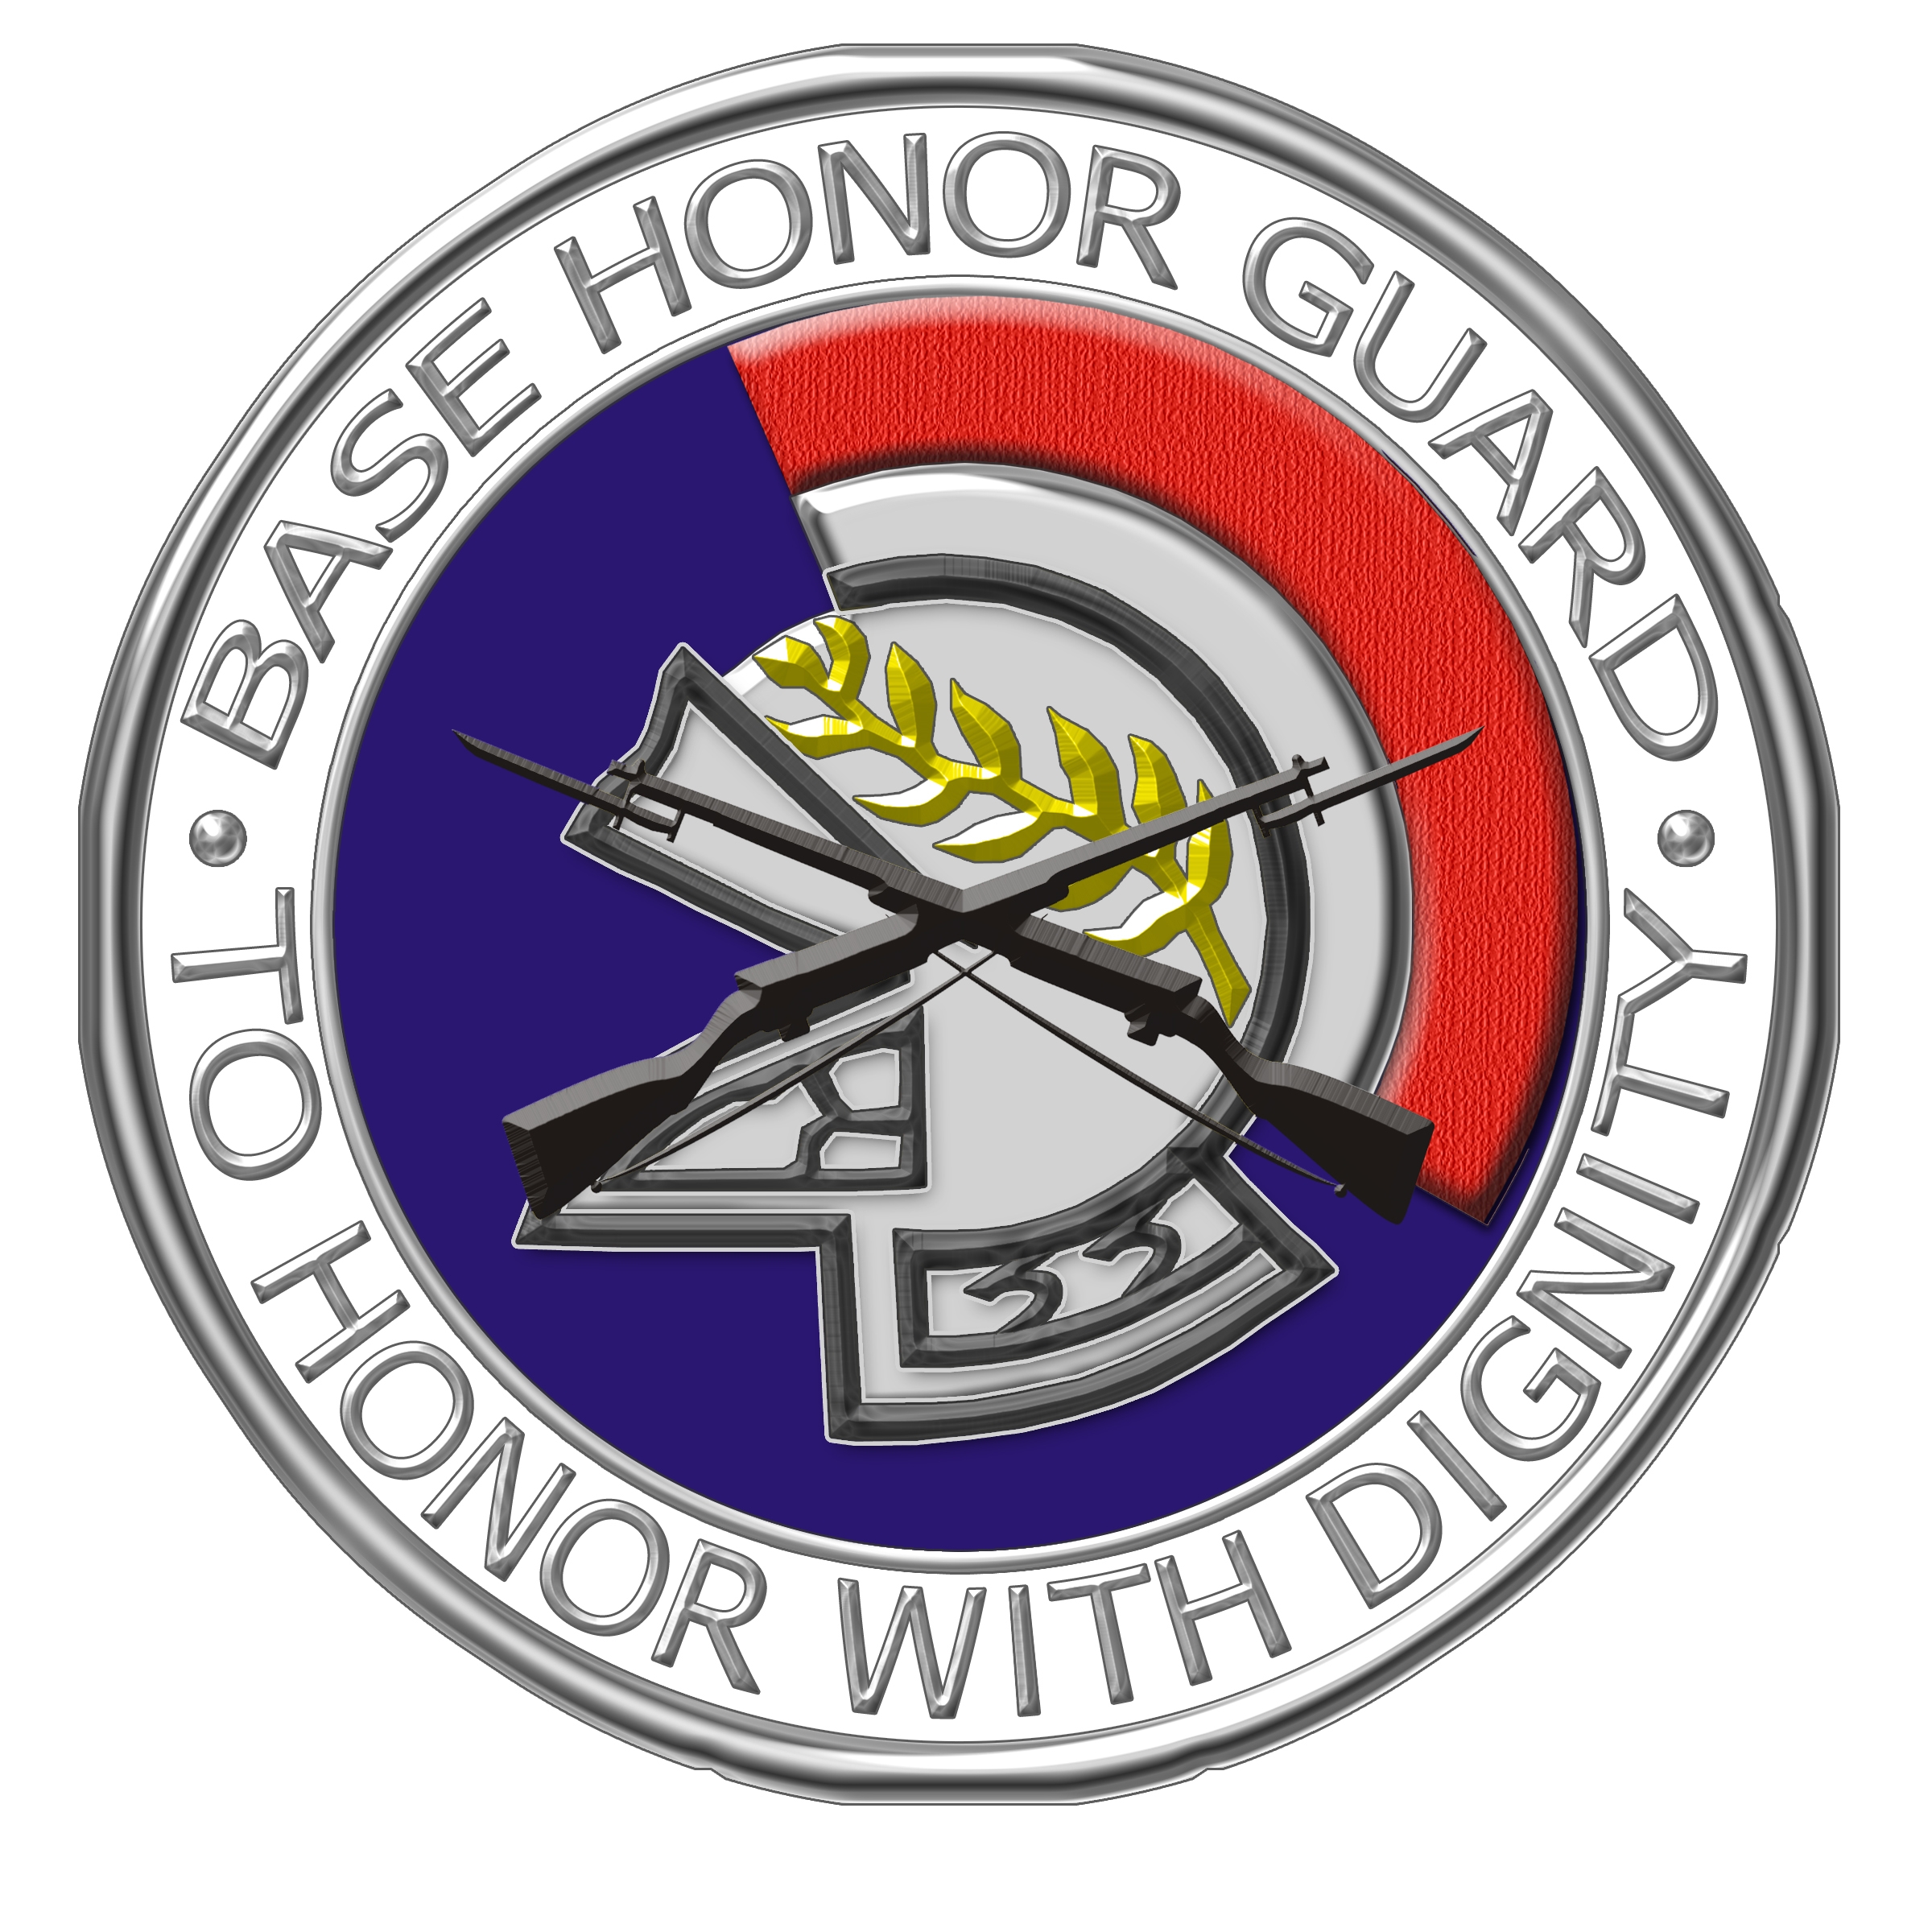 Base Honor Guard. To Honor with Dignity